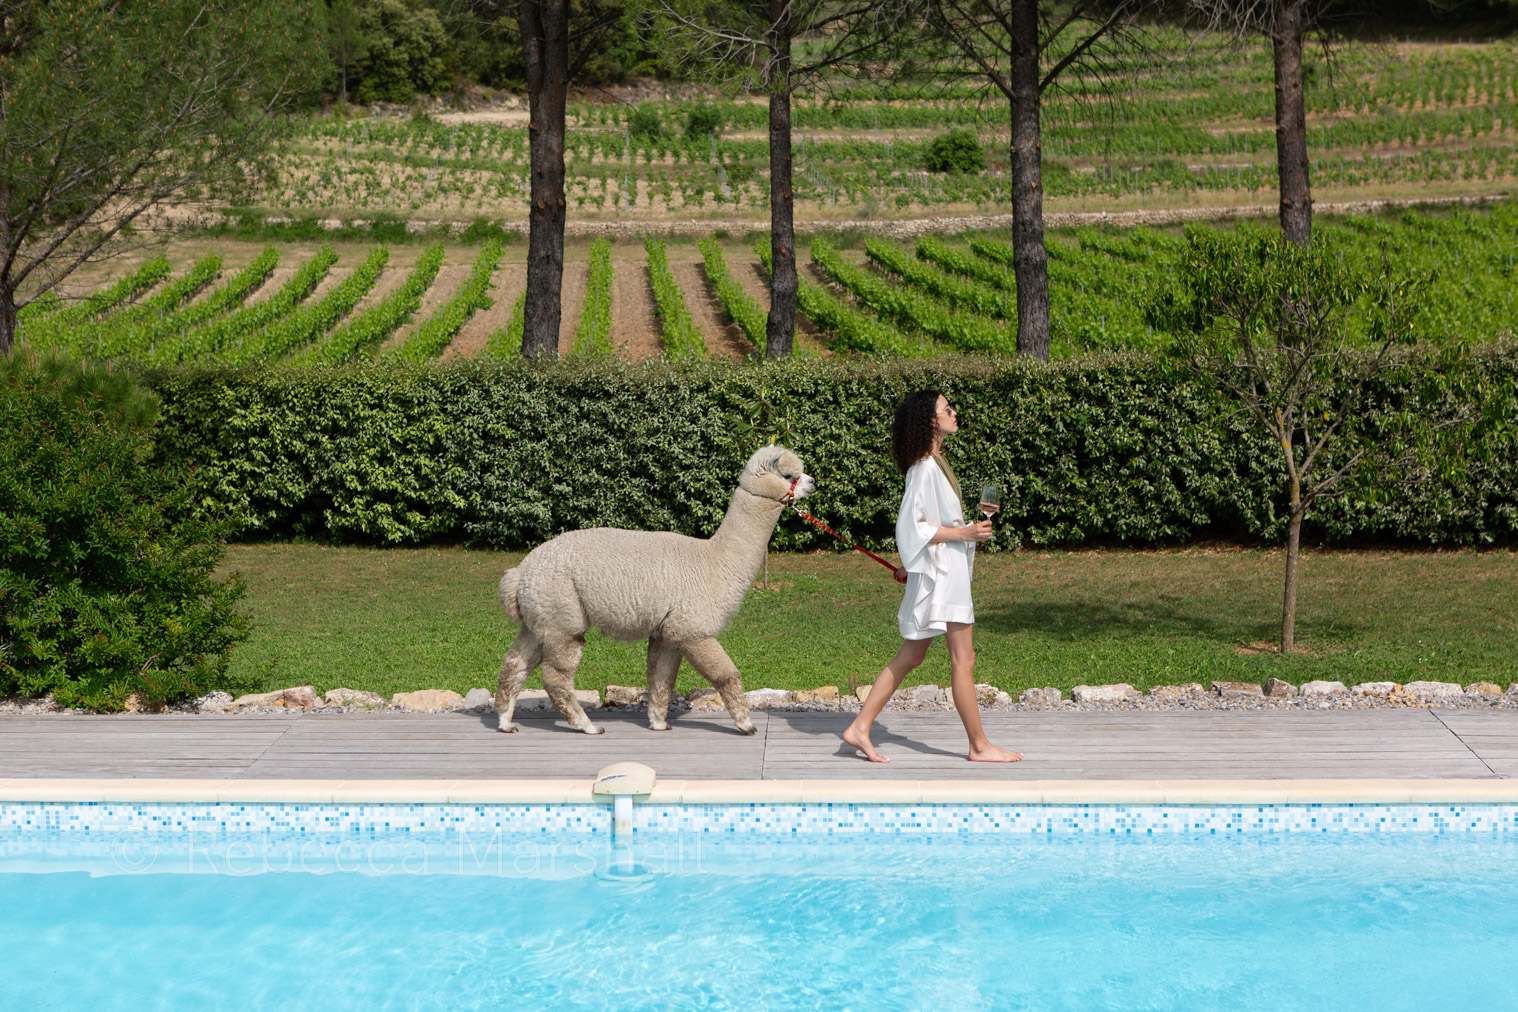 Girl in a white robe leads a pet llama beside a swimming pool with vineyards in the background